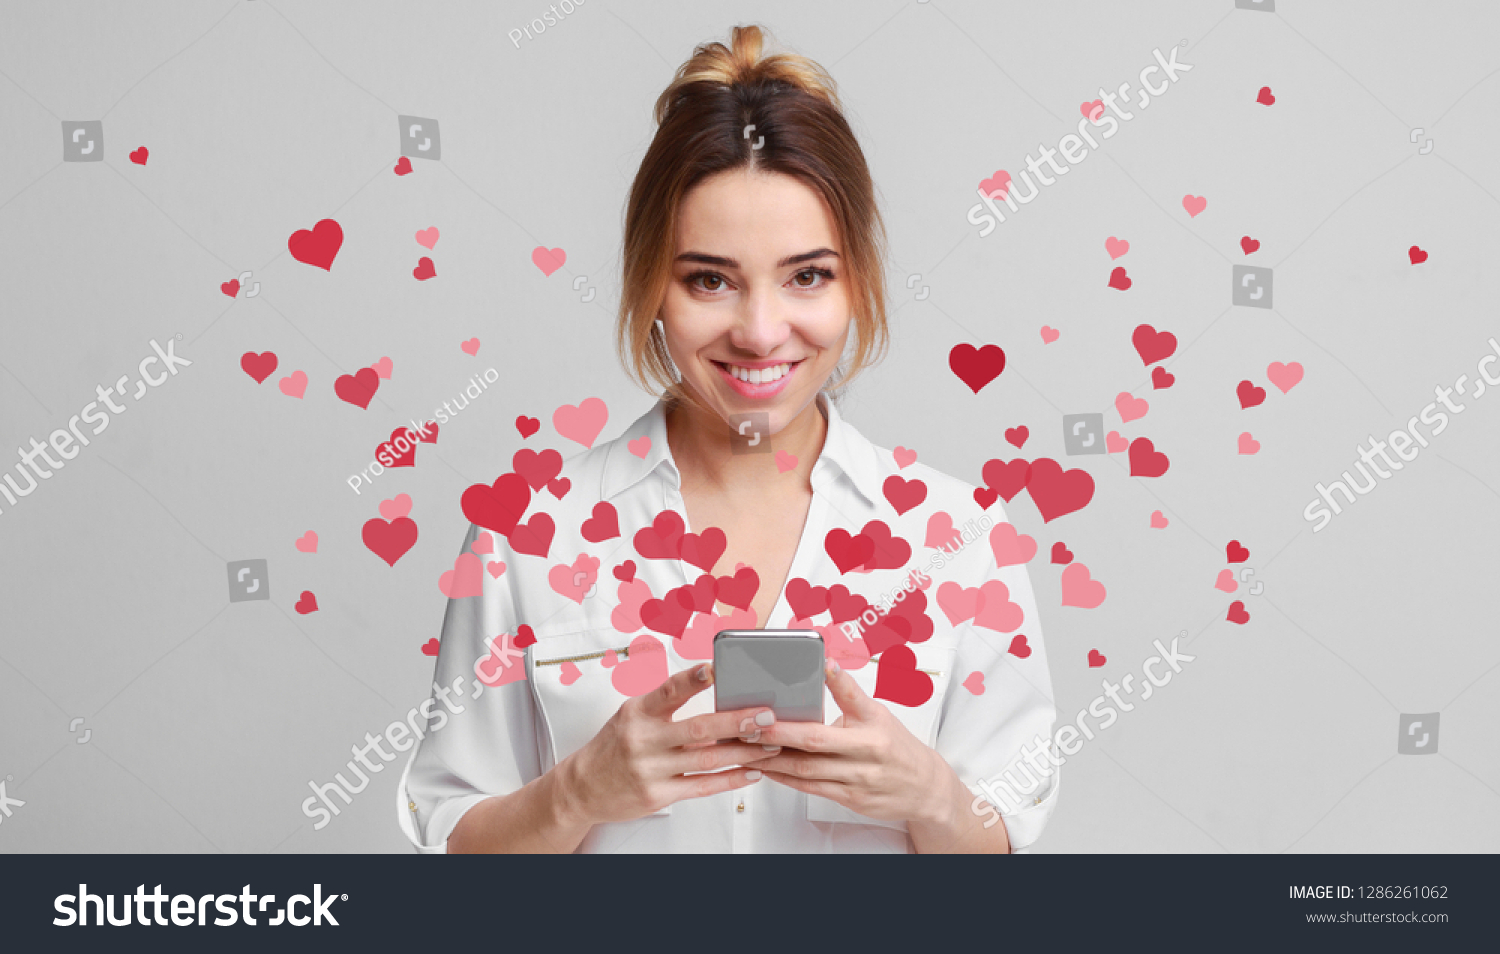 Valentine day concept, love message - hearts flying out smartphone in womans hands #1286261062